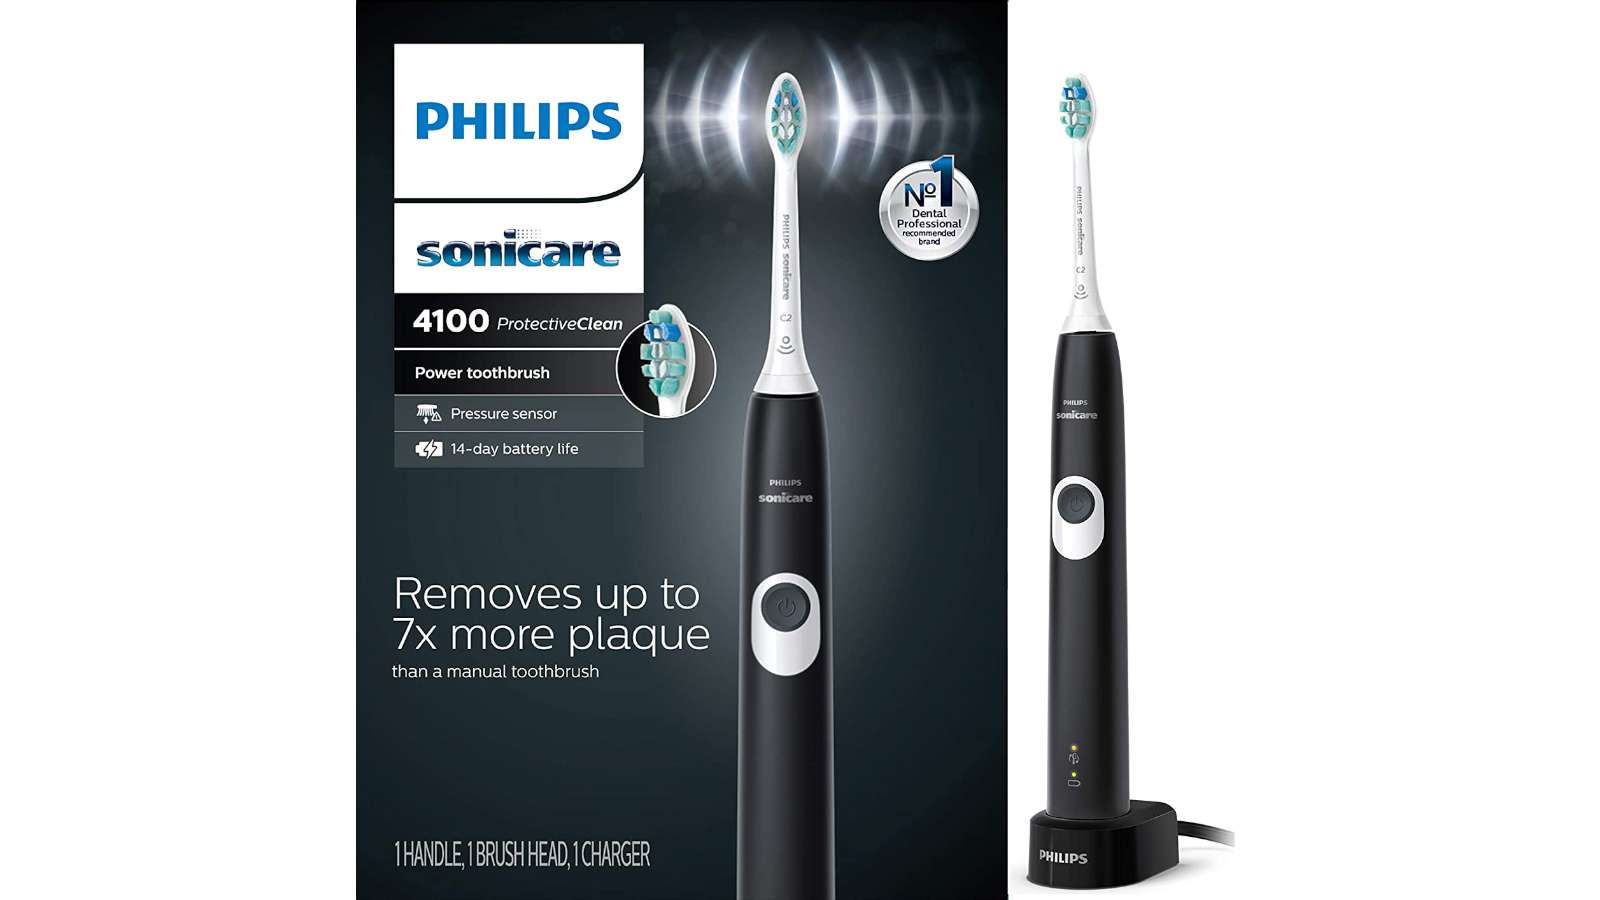 Philips Sonicare ProtectiveClean 4100 (Black, HX6810/50) toothbrush and its packaging